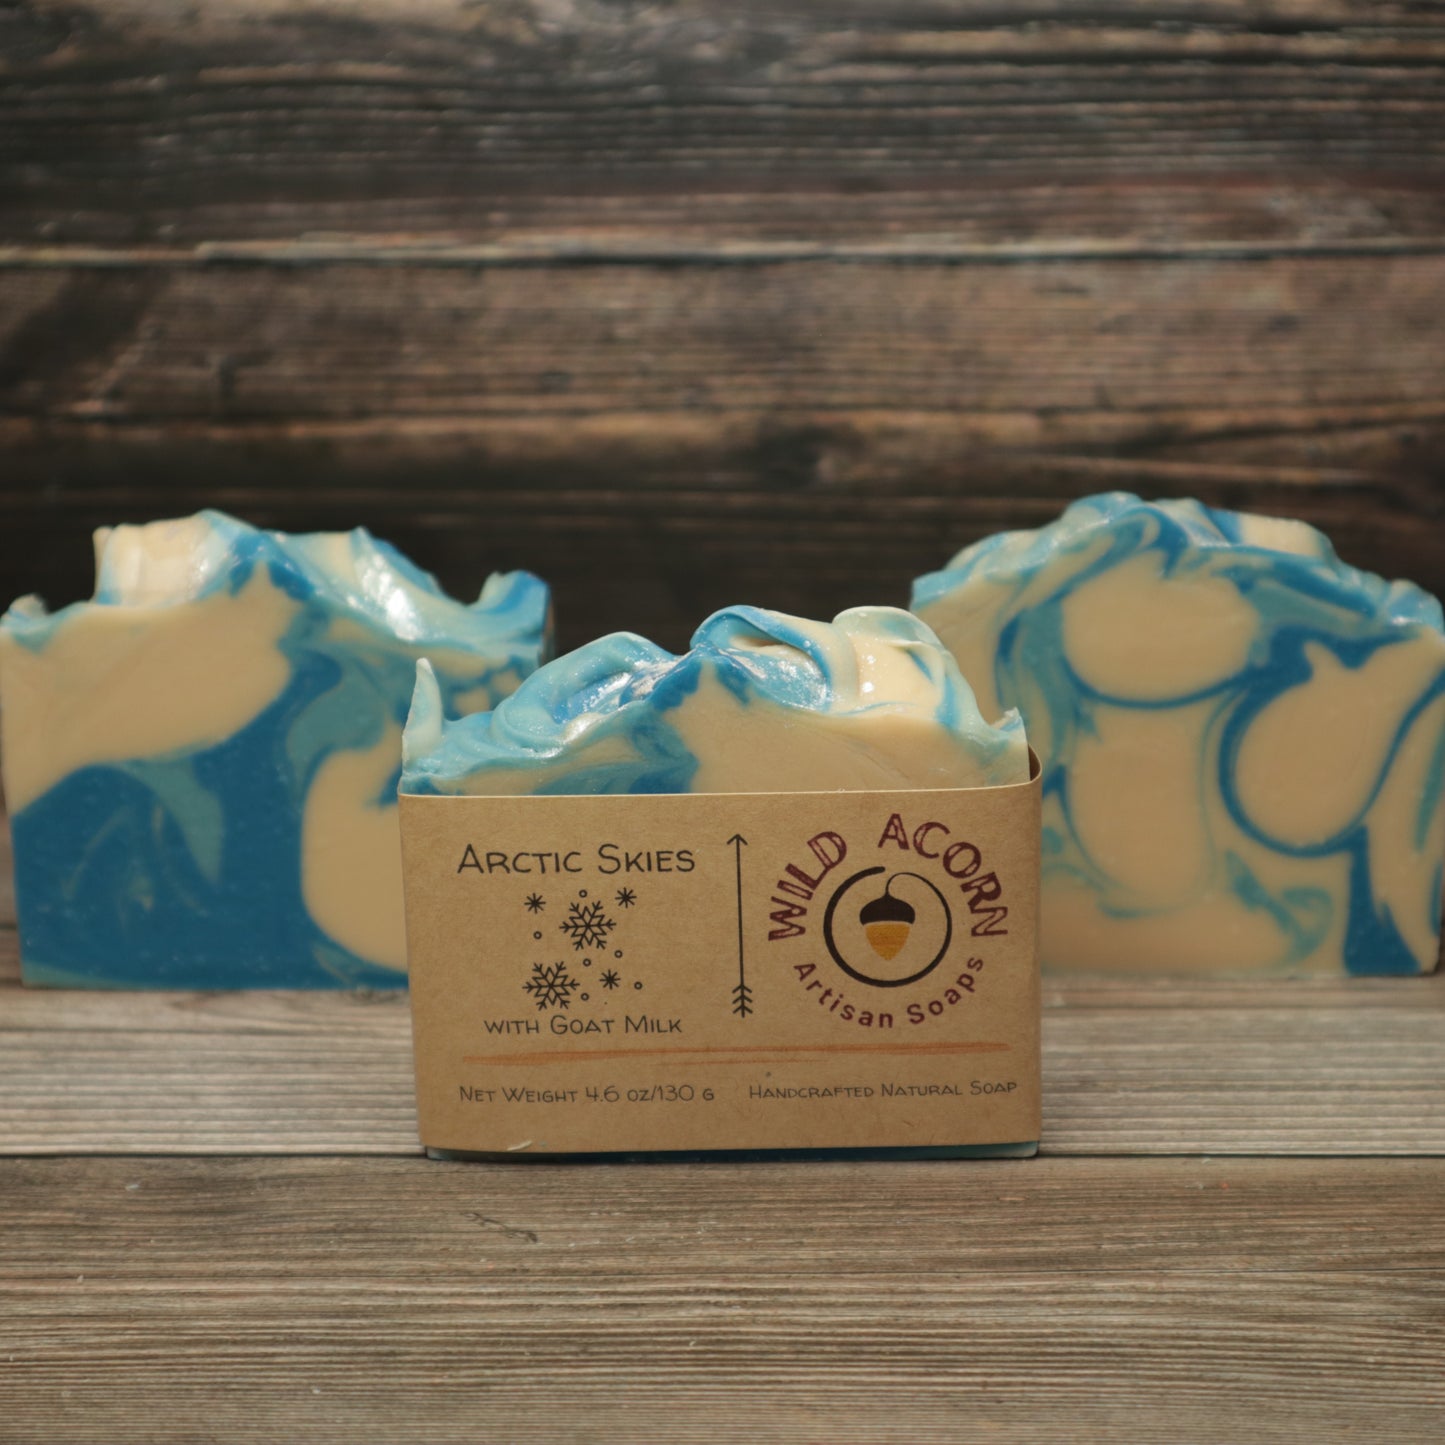 Three bars of soap with dark blue, light blue and white swirls. One bar has a tan label on it with a picture of snowflakes on it.